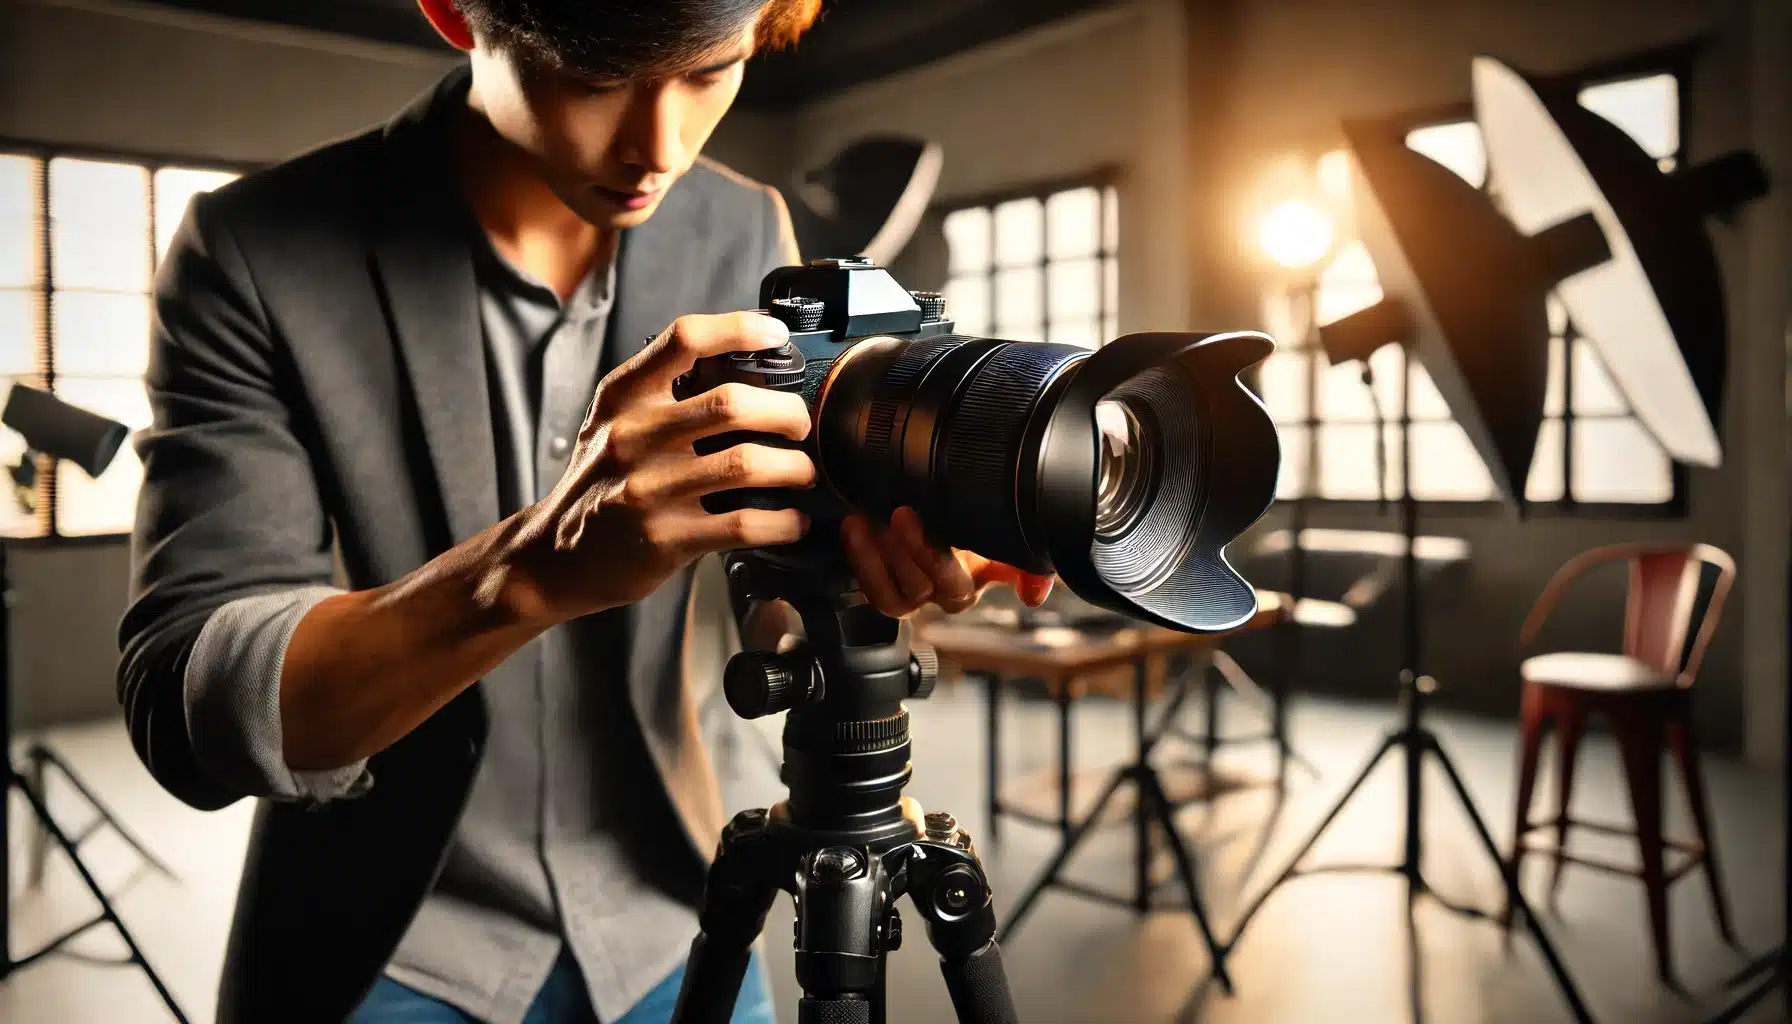 A professional photographer using a 35mm lens on a camera in a well-lit studio, adjusting the camera on a tripod with various photography equipment in the background.